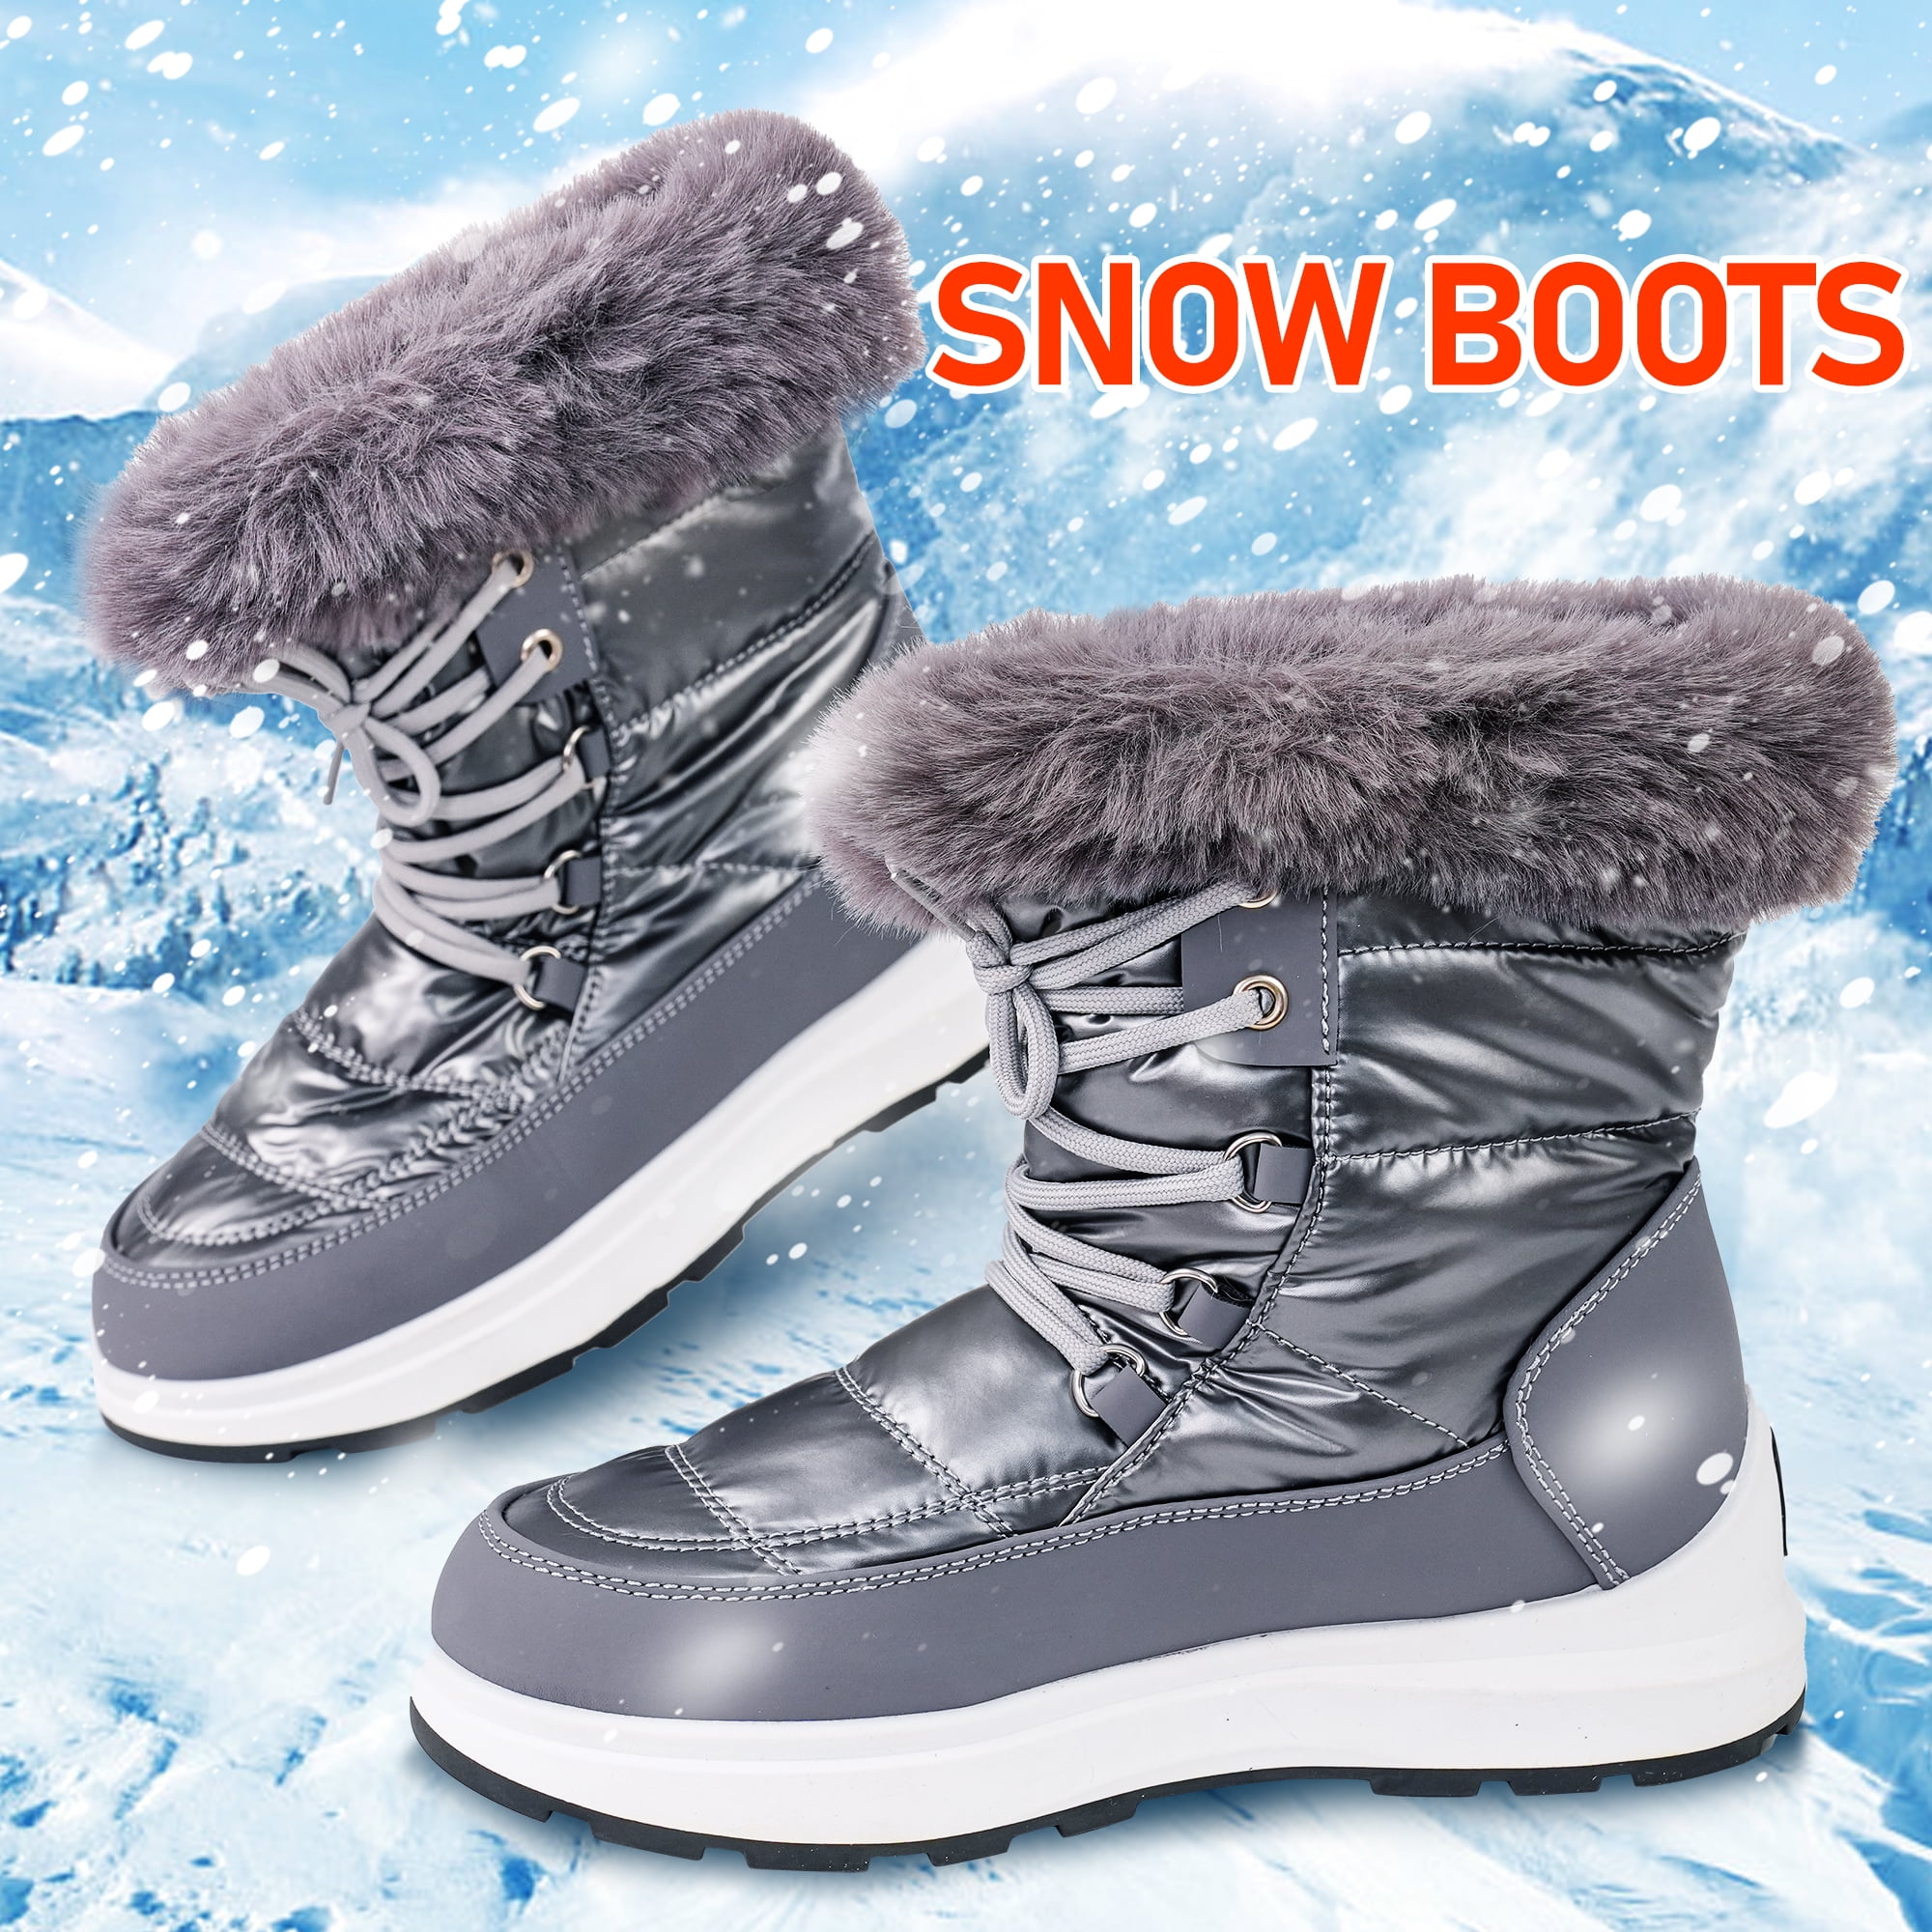 Winter Boots for Women Clearance, Snow Boots for Womens, Warm Winter ...